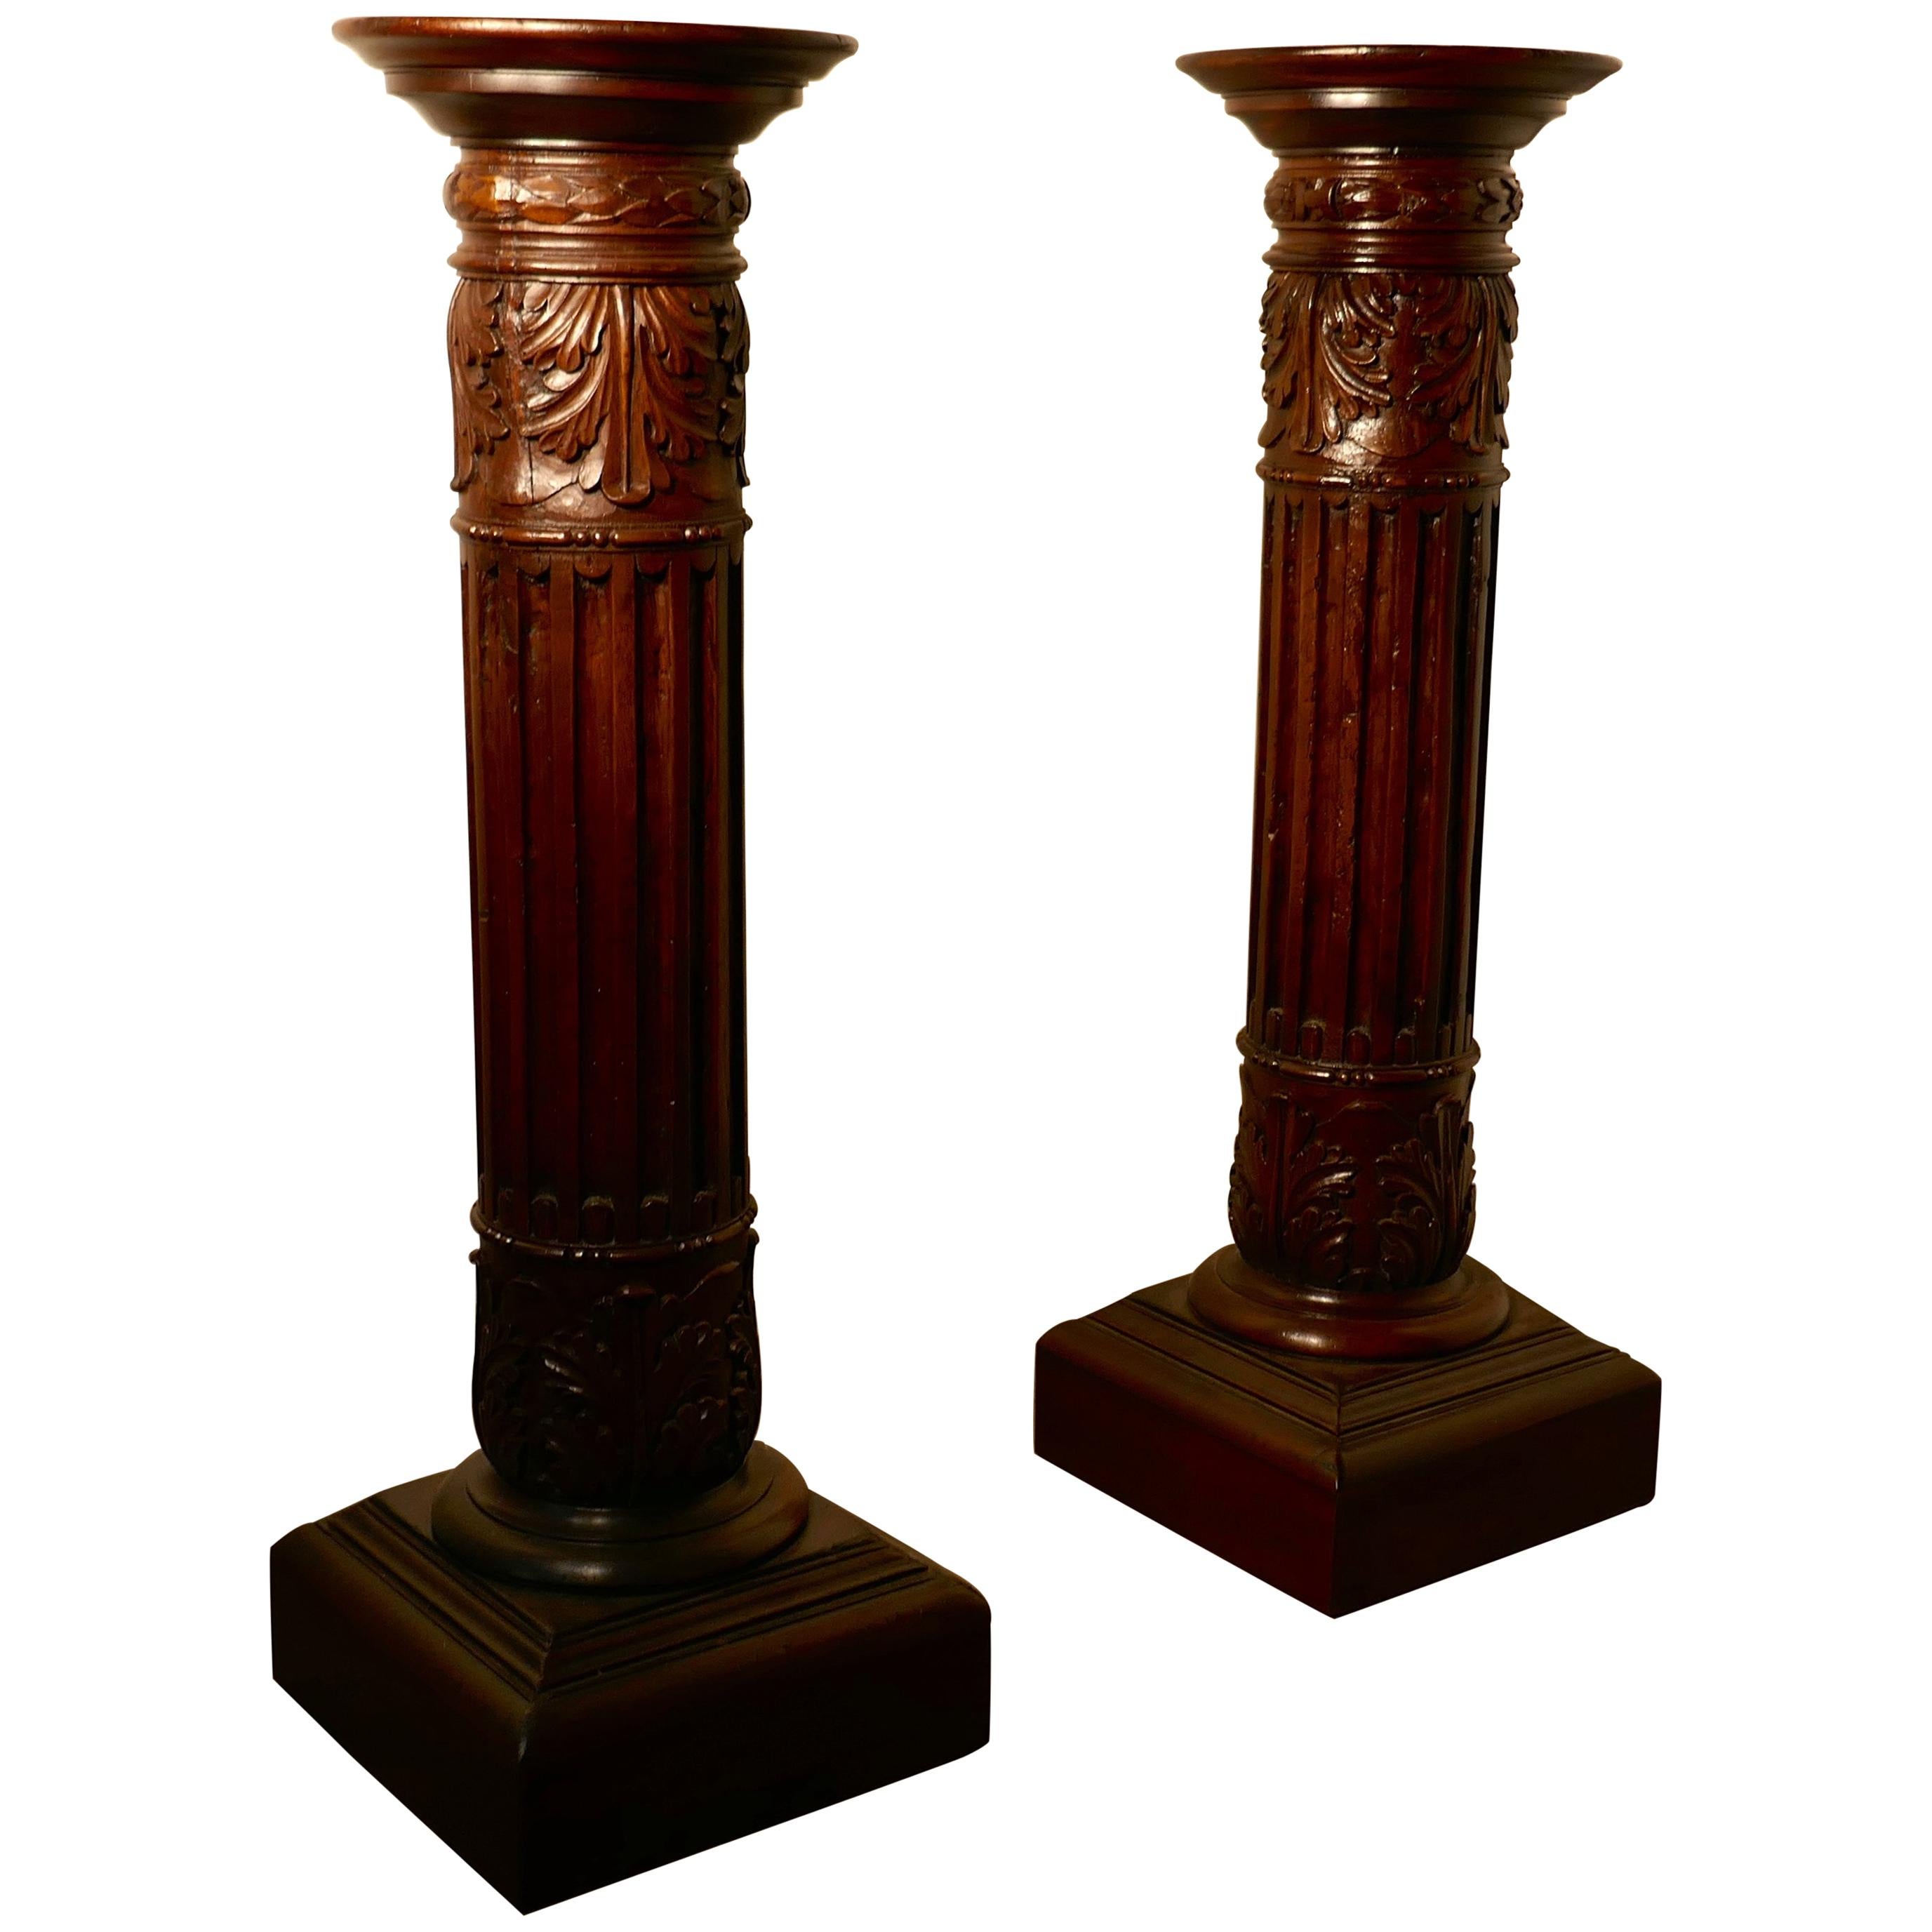 Pair of 18th Century Carved Solid Mahogany Pedestals